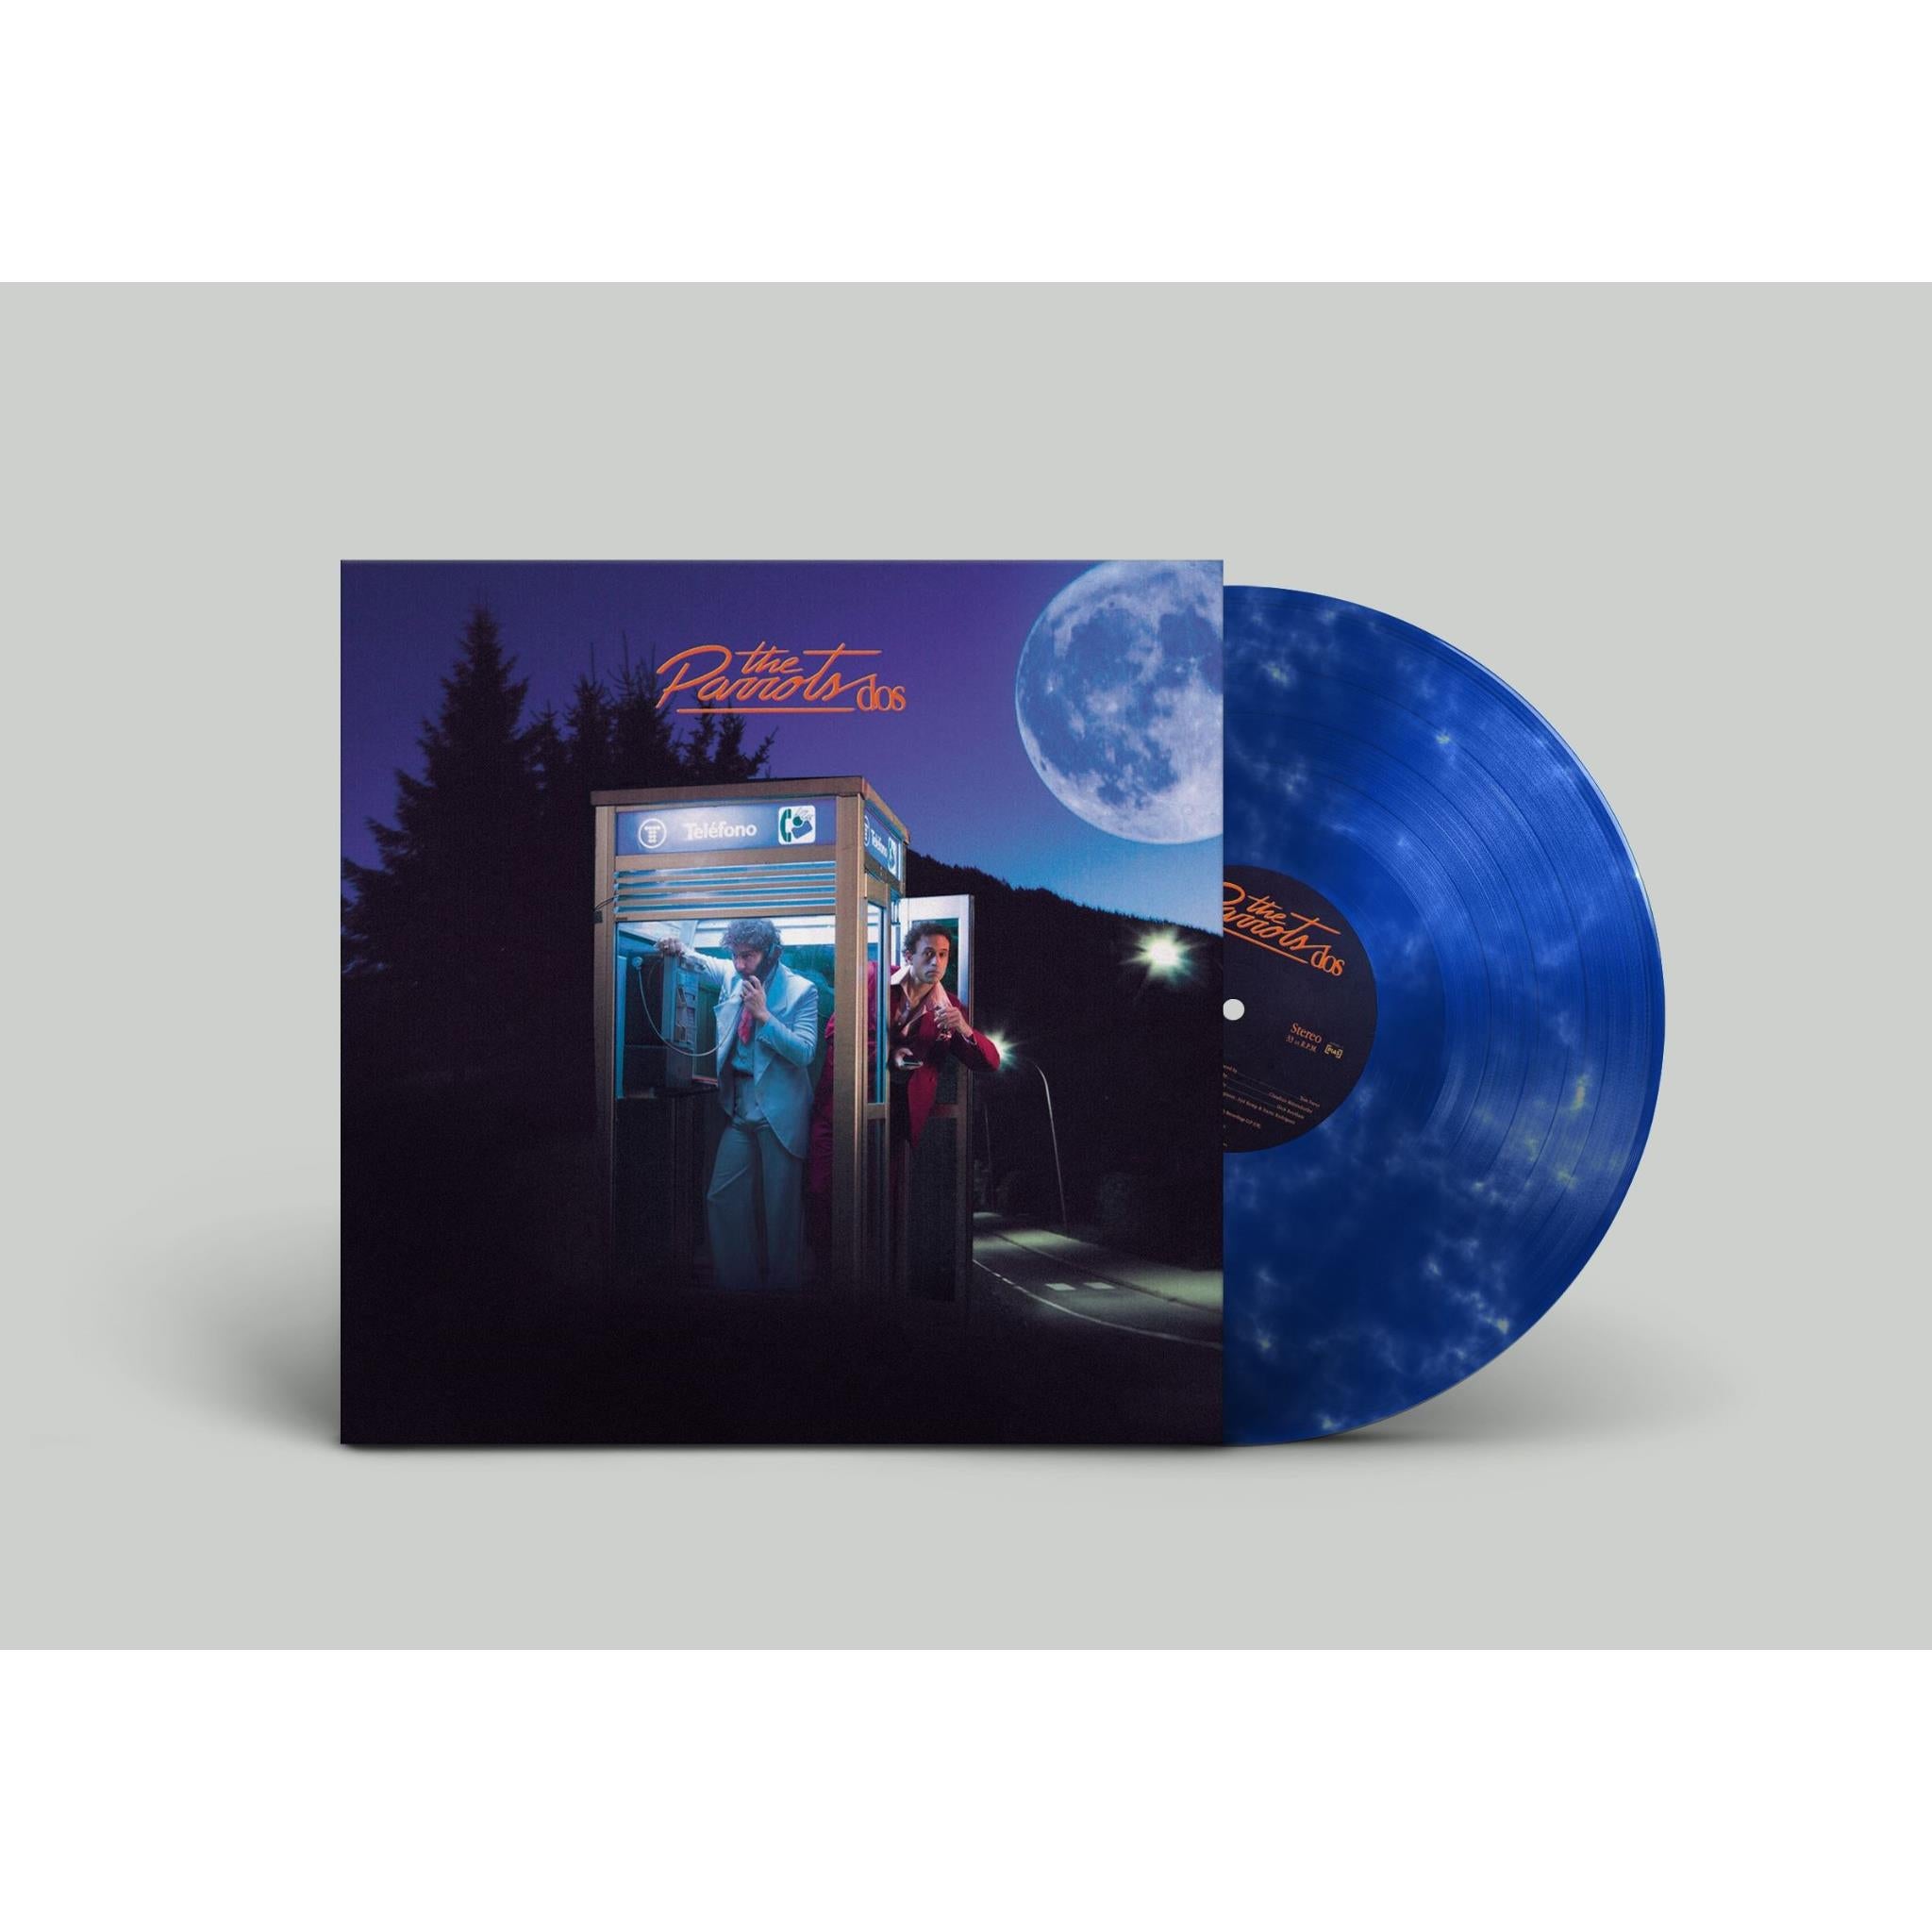 dos (limited clear / blue marble vinyl)